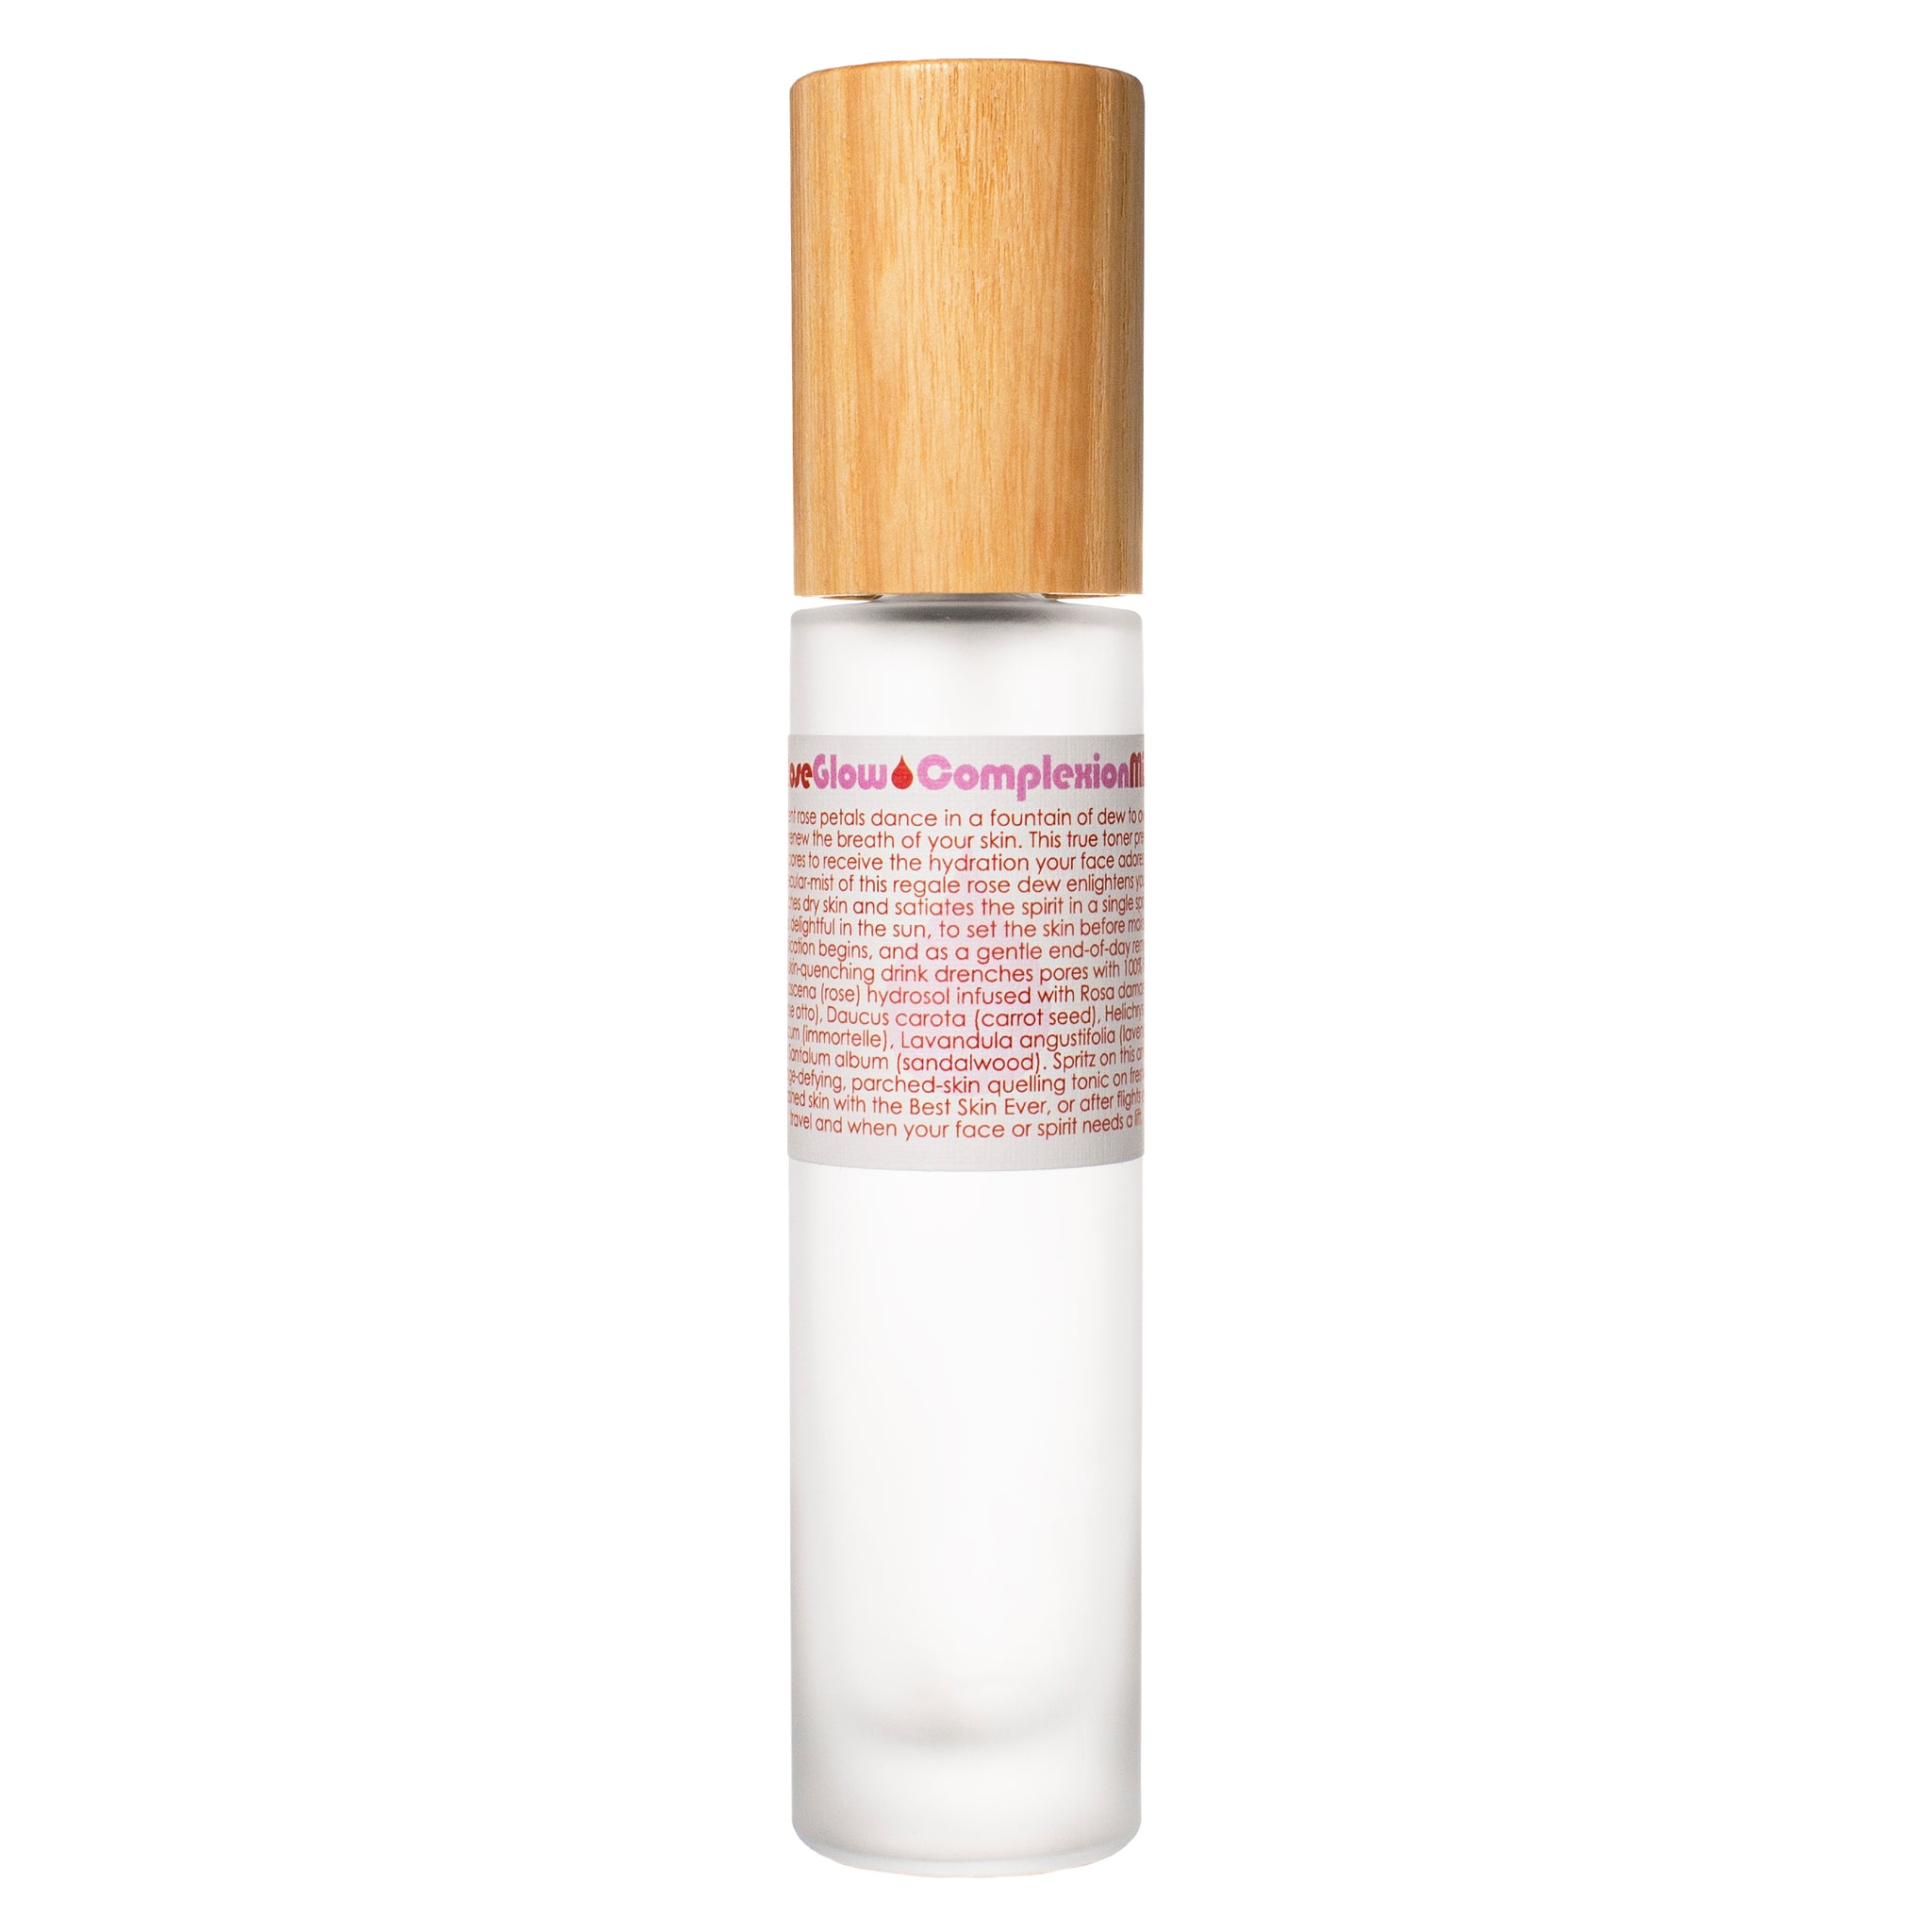 NEW! Rose Glow Complexion Mist, 50ml